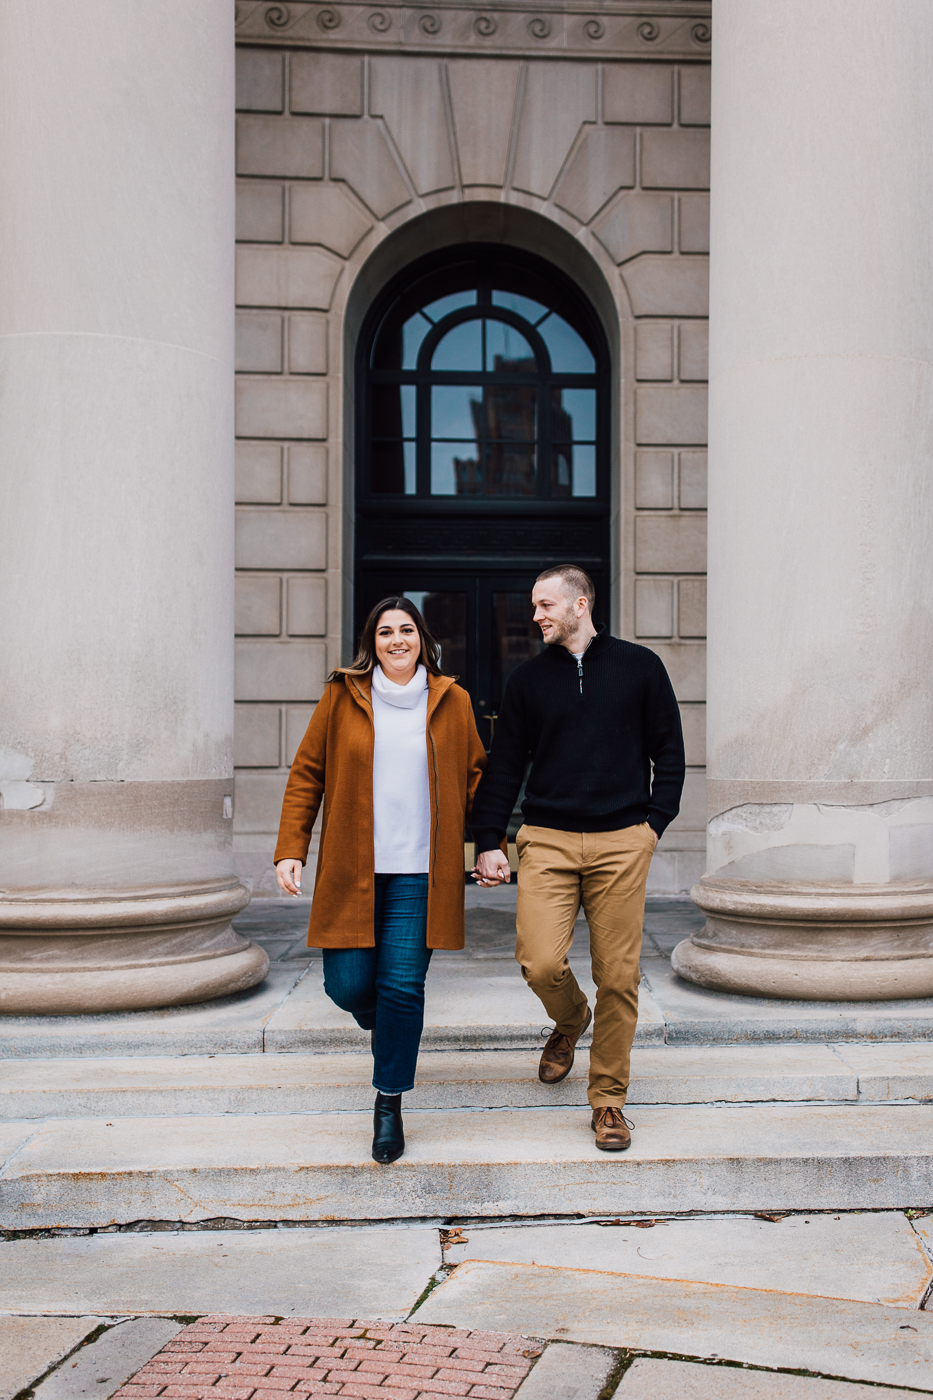  engaged couples walks around downtown Syracuse while doing a winter photo shoot with Brittany Juravich 